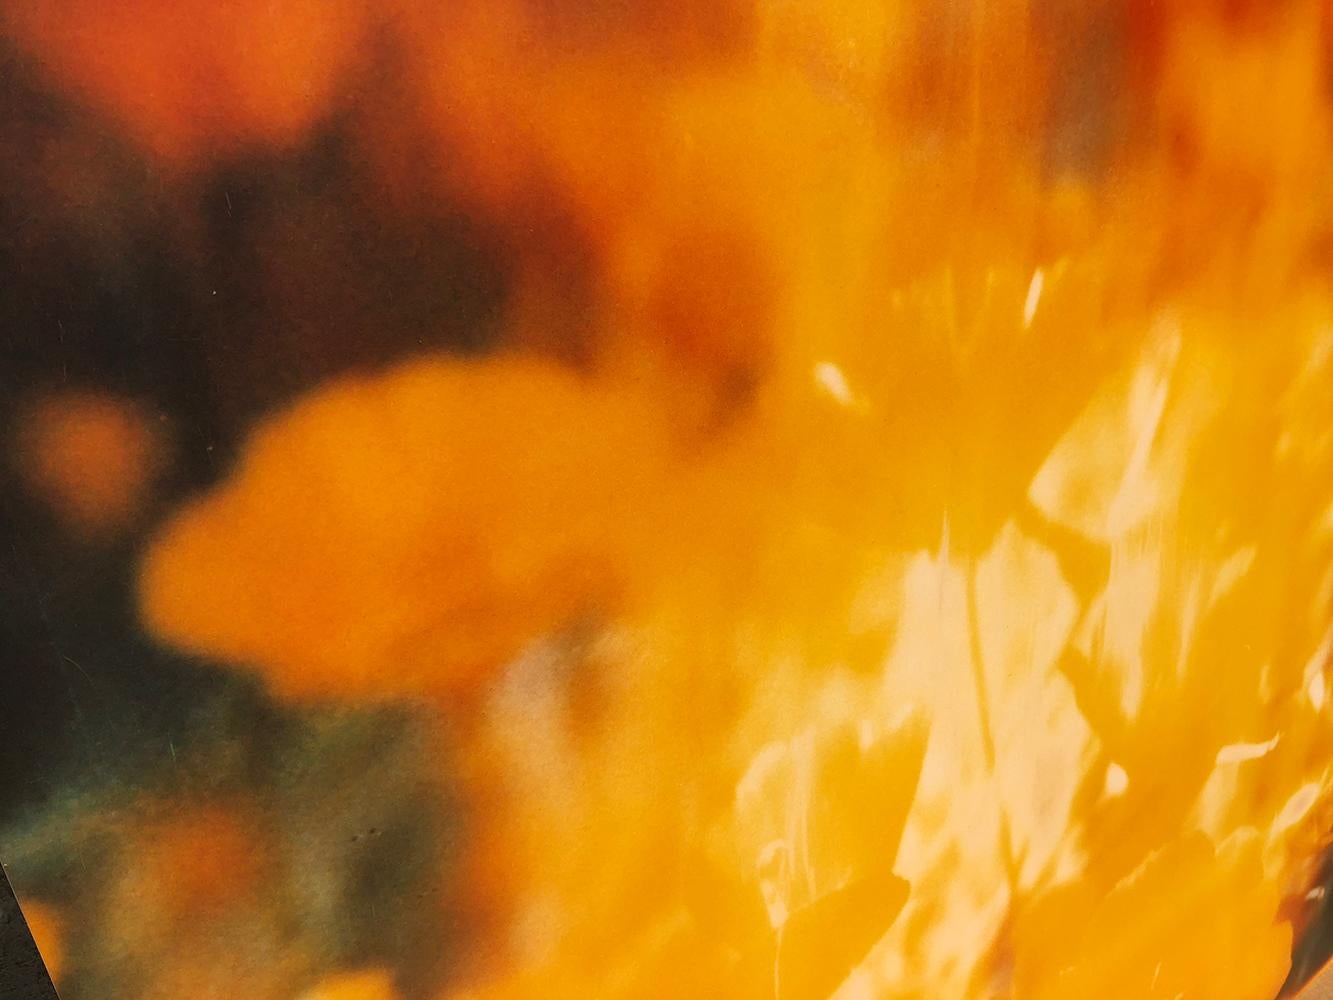 Yellow Flower (The Last Picture Show) - 2005

128x125cm, Edition 5/5, 
analog C-Print, hand-printed by the artist, based on a Polaroid,.
Artist Inventory 672.05. 
Signed on verso with certificate. 
Mounted on Aluminum with matte